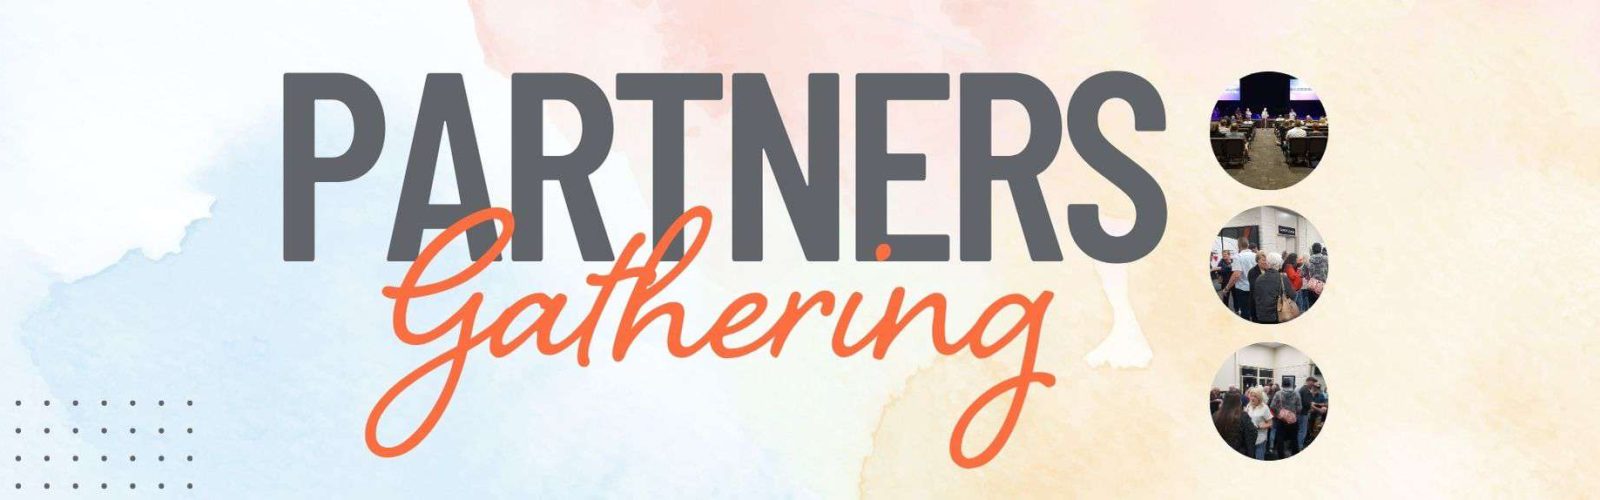 Partners Gathering Berwick Church of Christ Cancelled